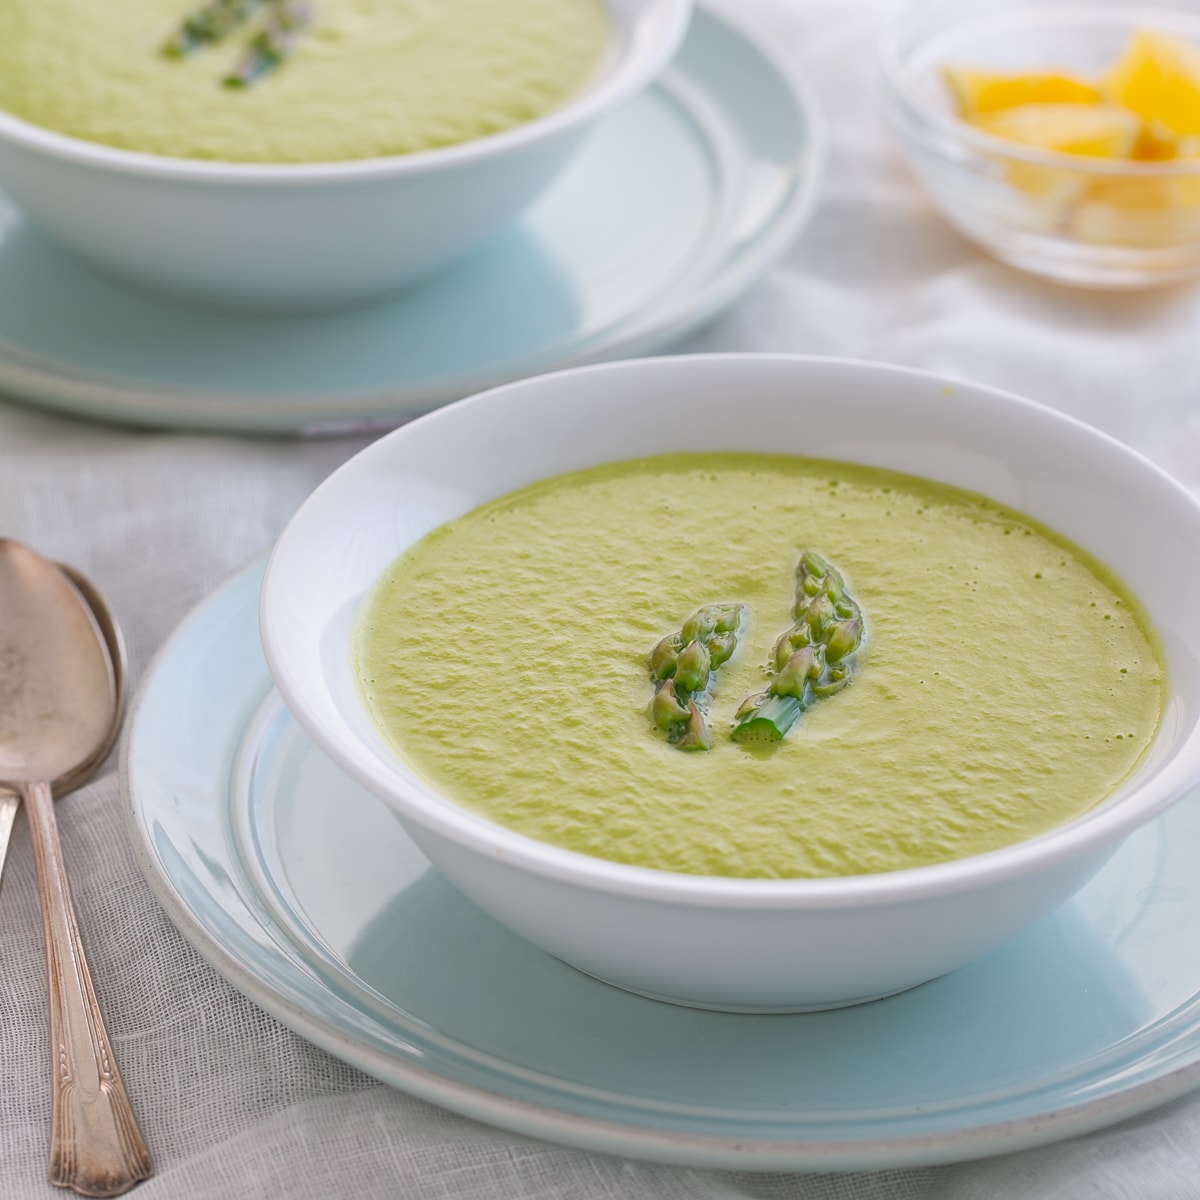 Bright green asparagus soup in a white bowl on a bloue plate on the dinner table.